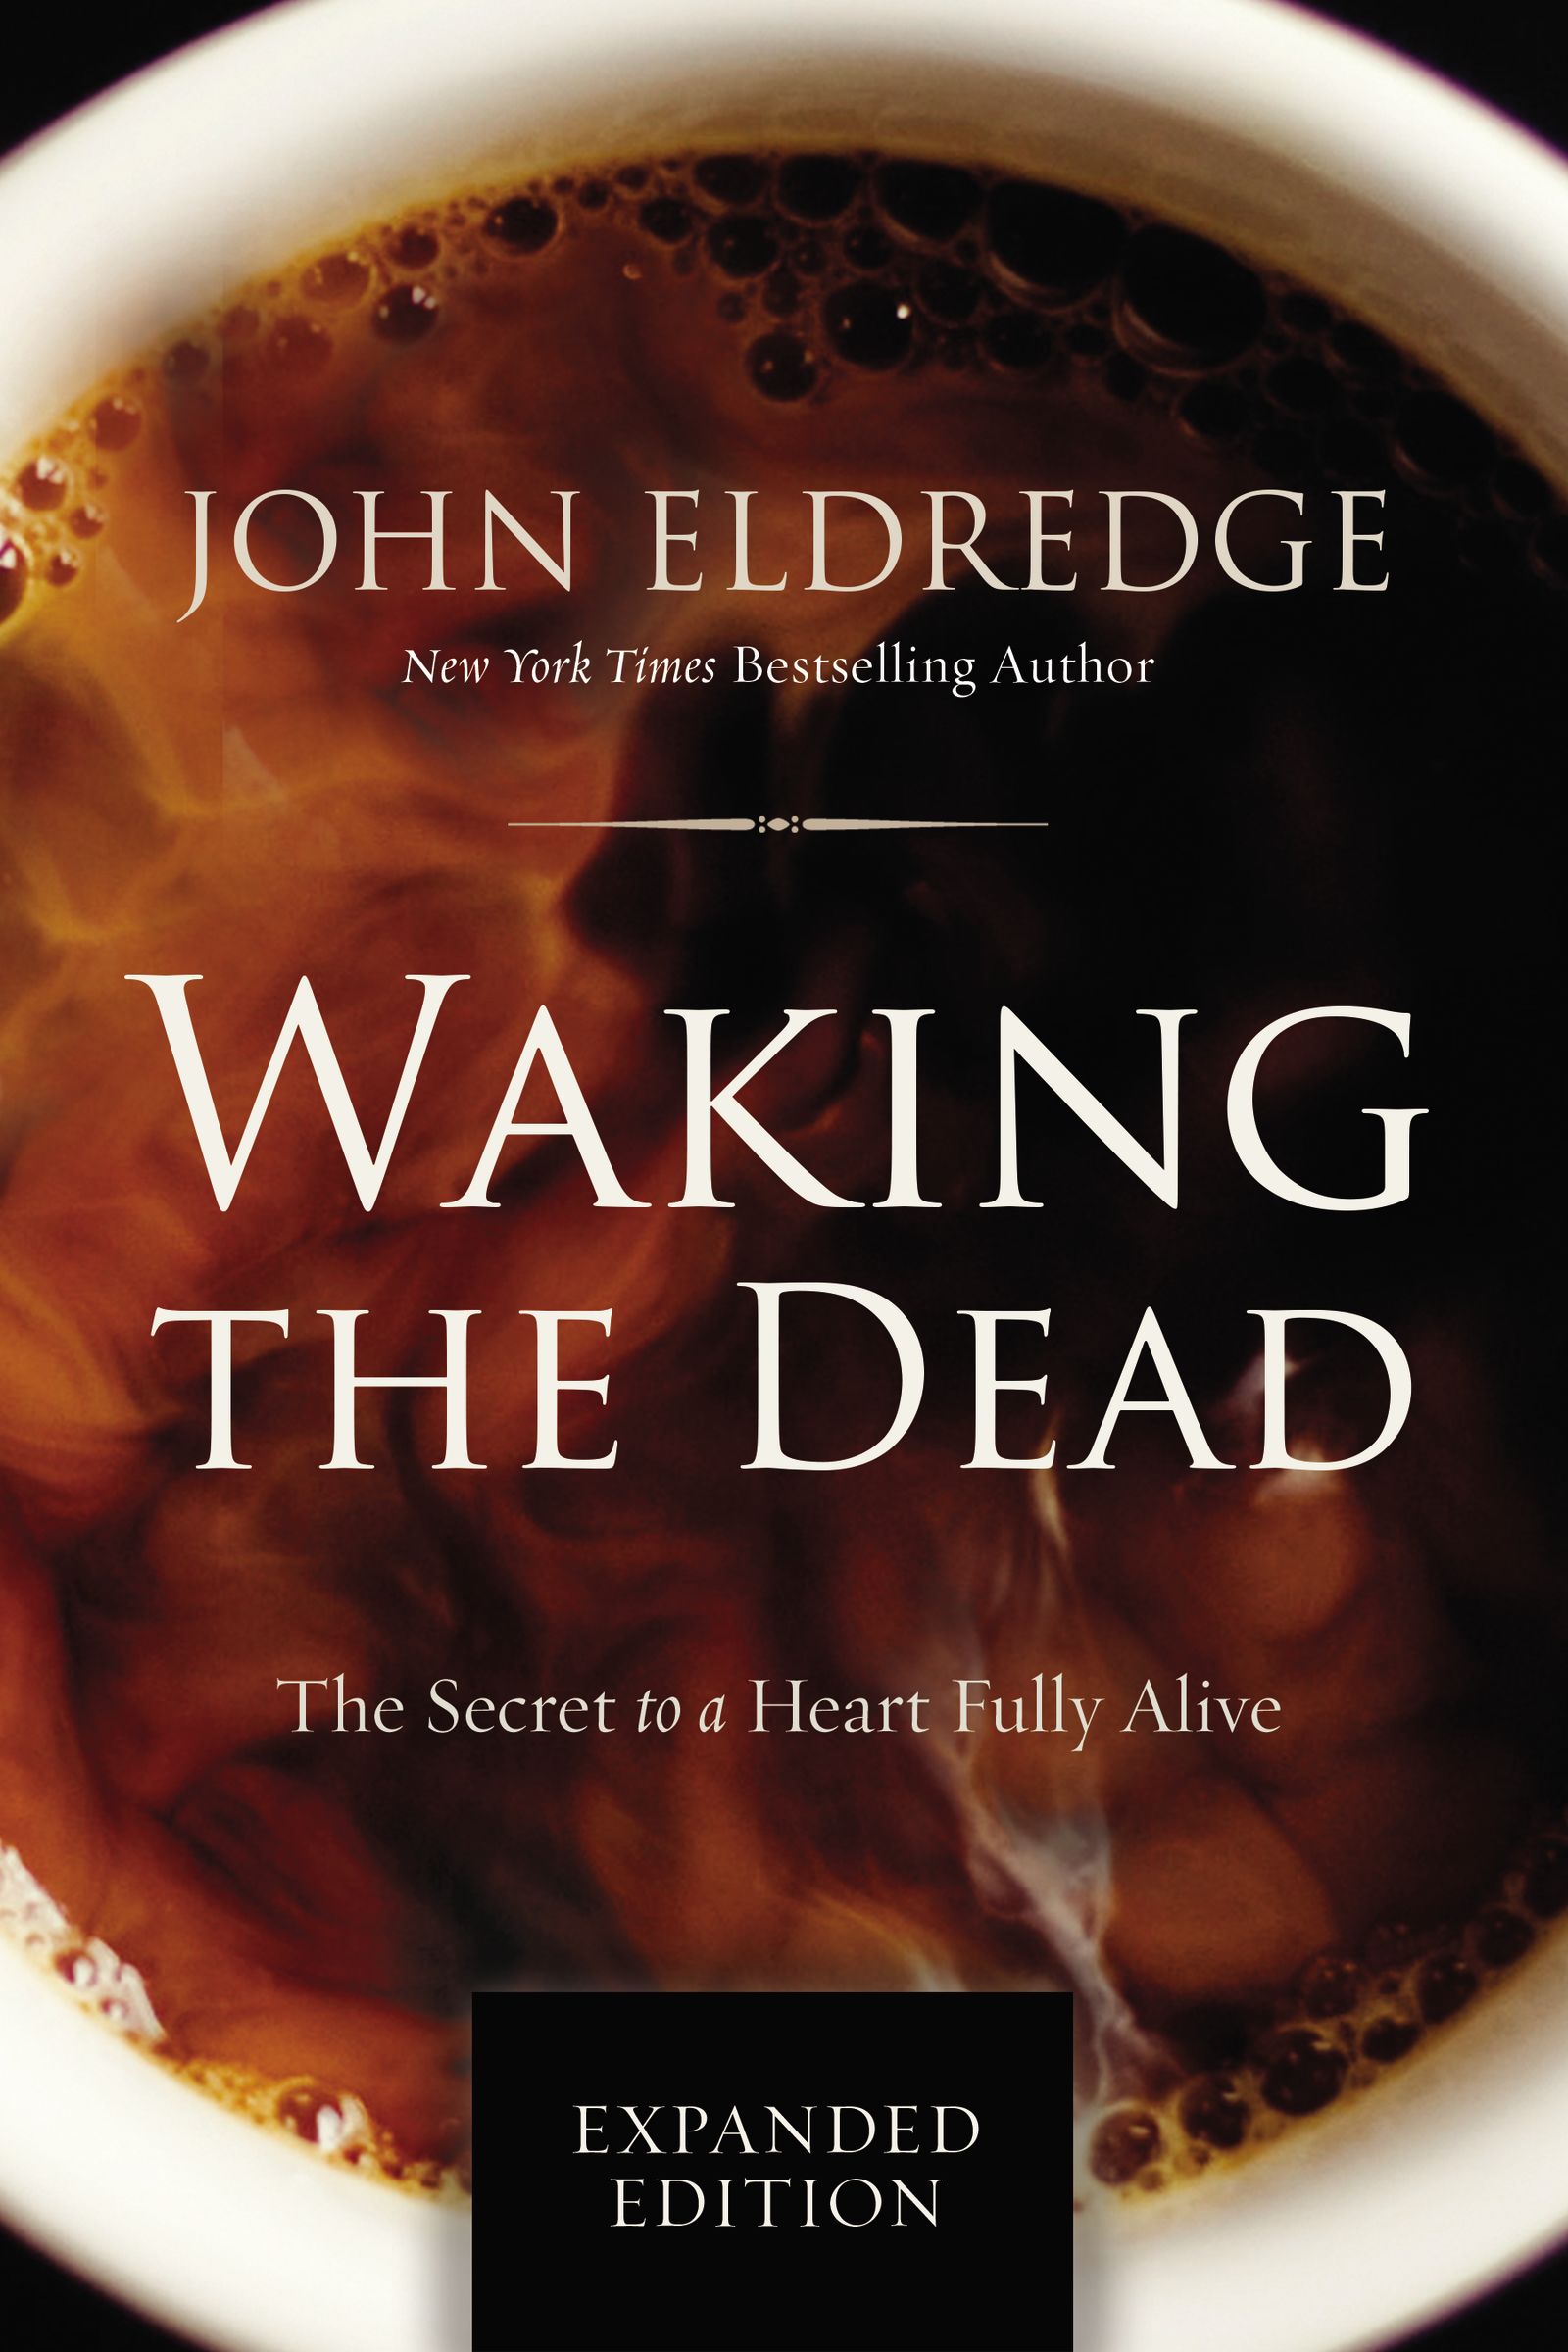 Image of Waking the Dead other